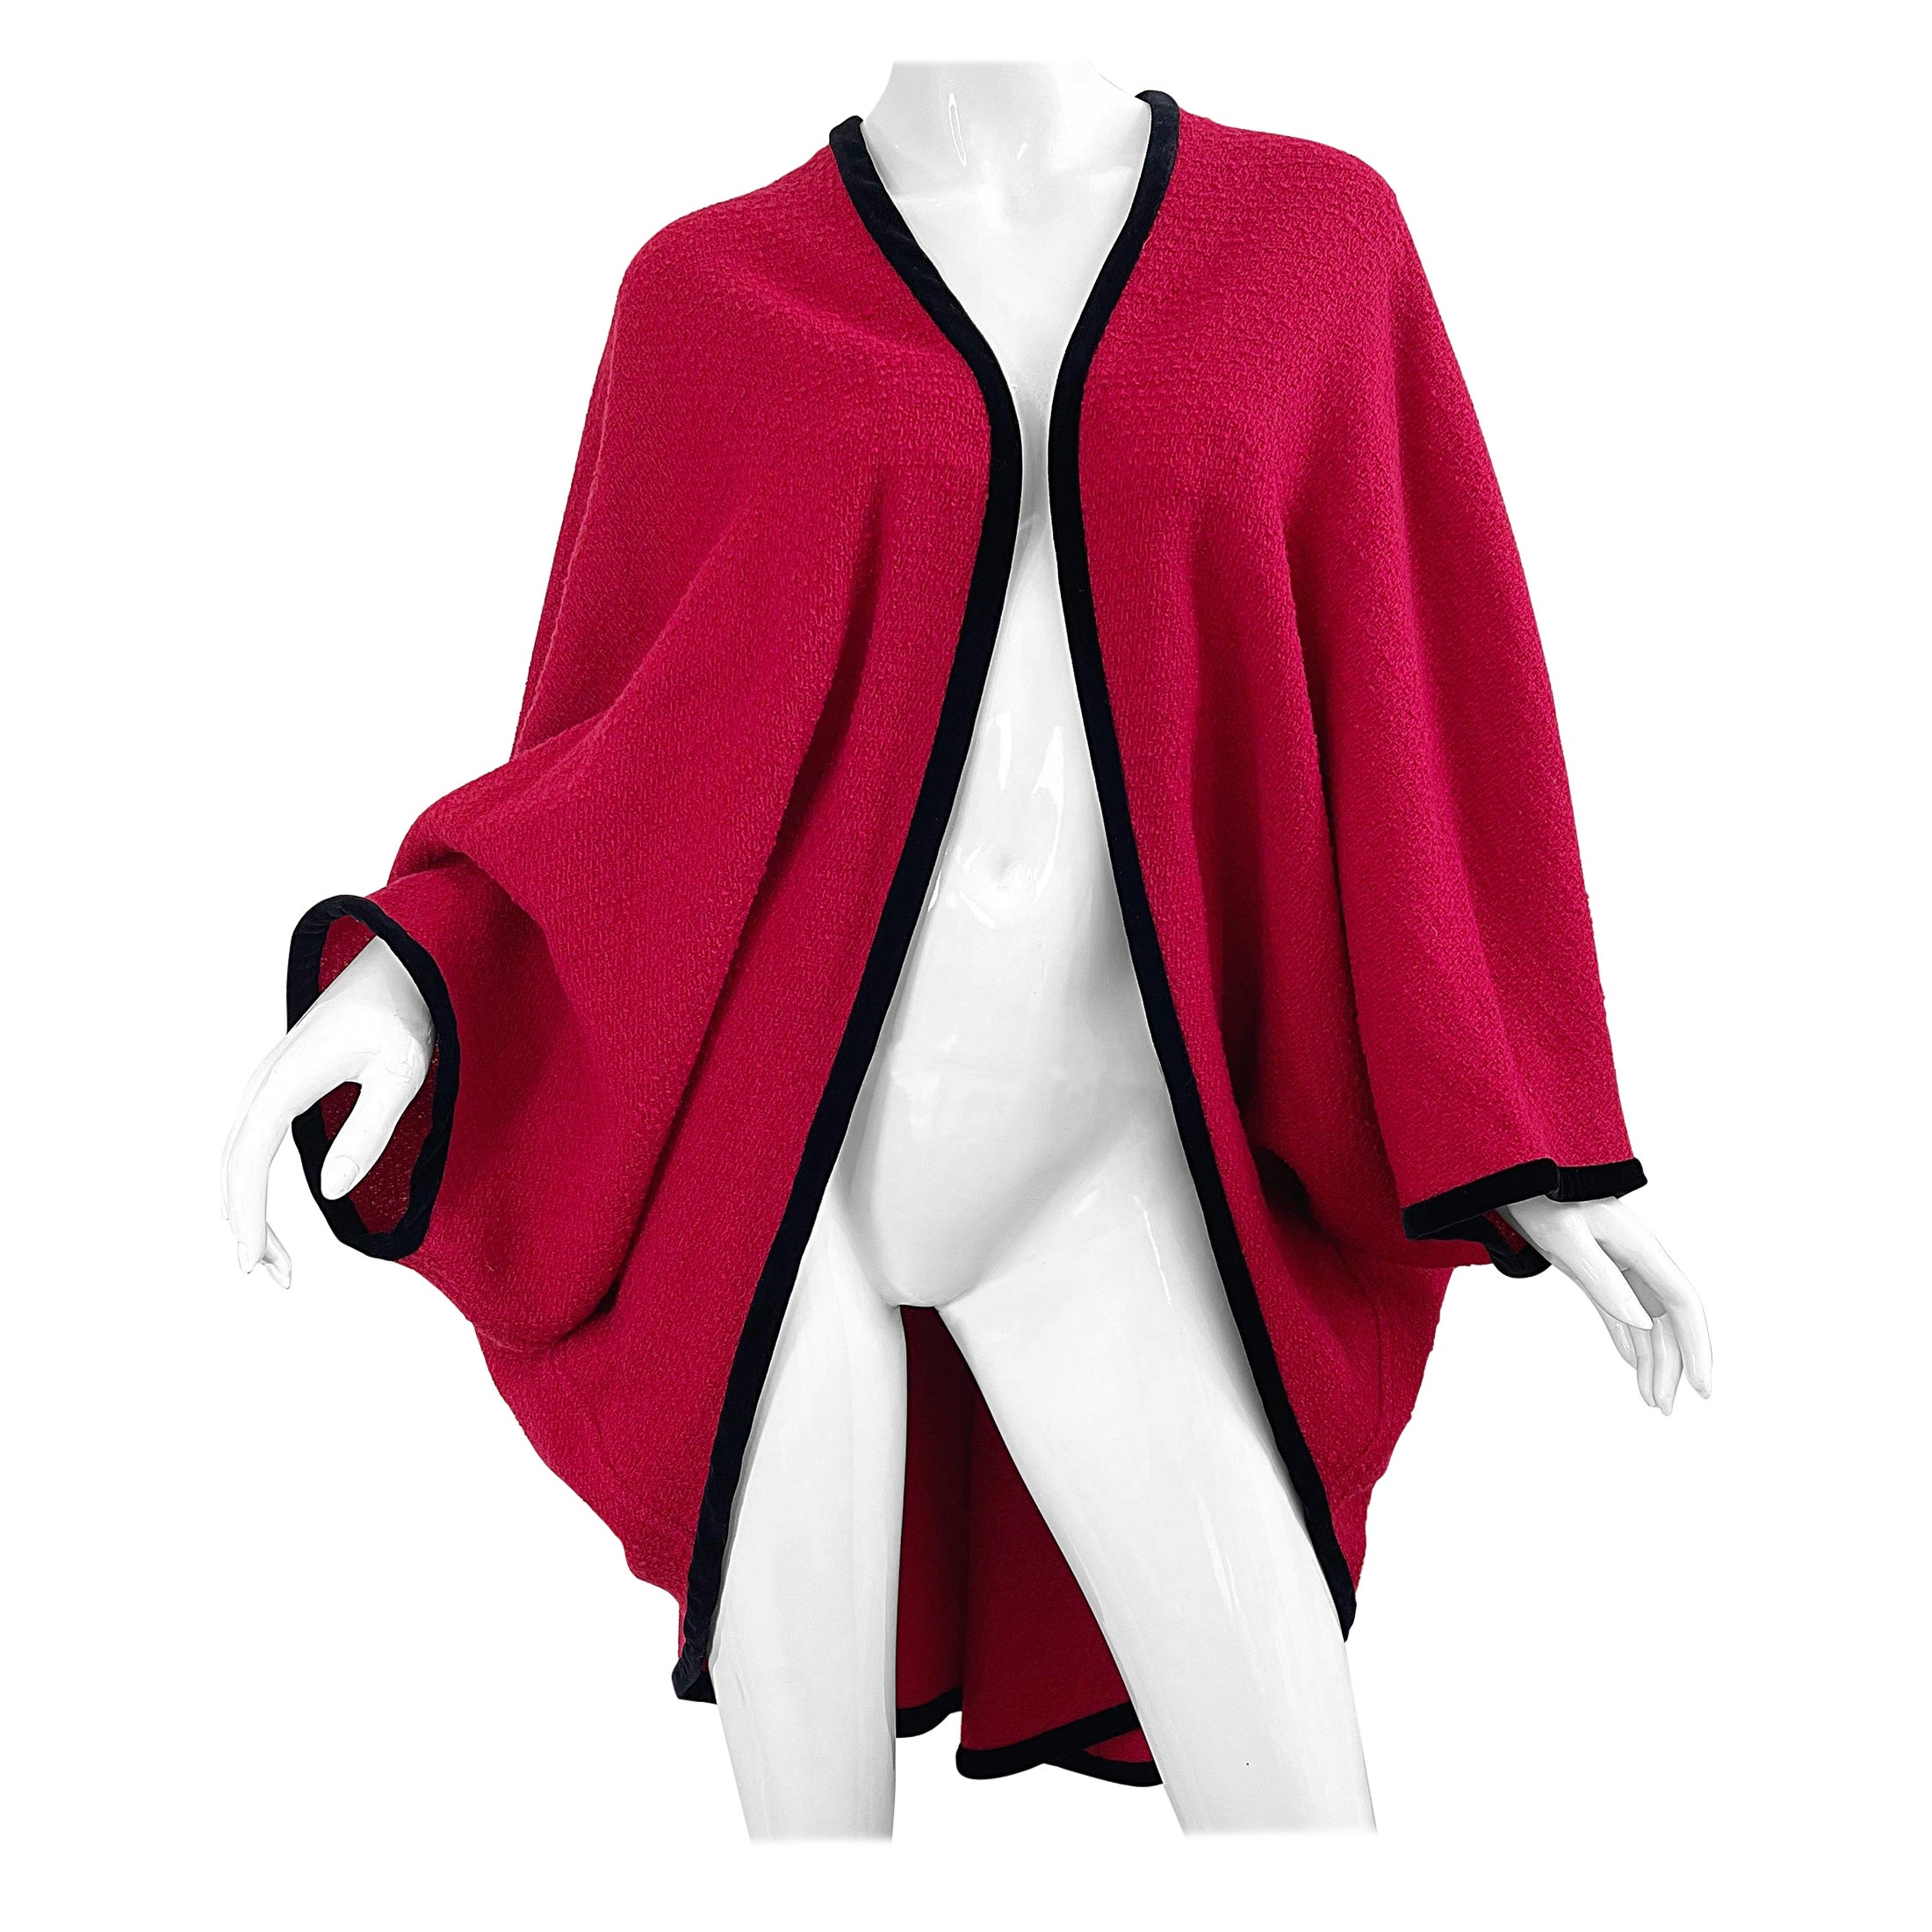 Karl Lagerfeld 1980s Lipstick Red Boiled Wool Cocoon Vintage Cape ...